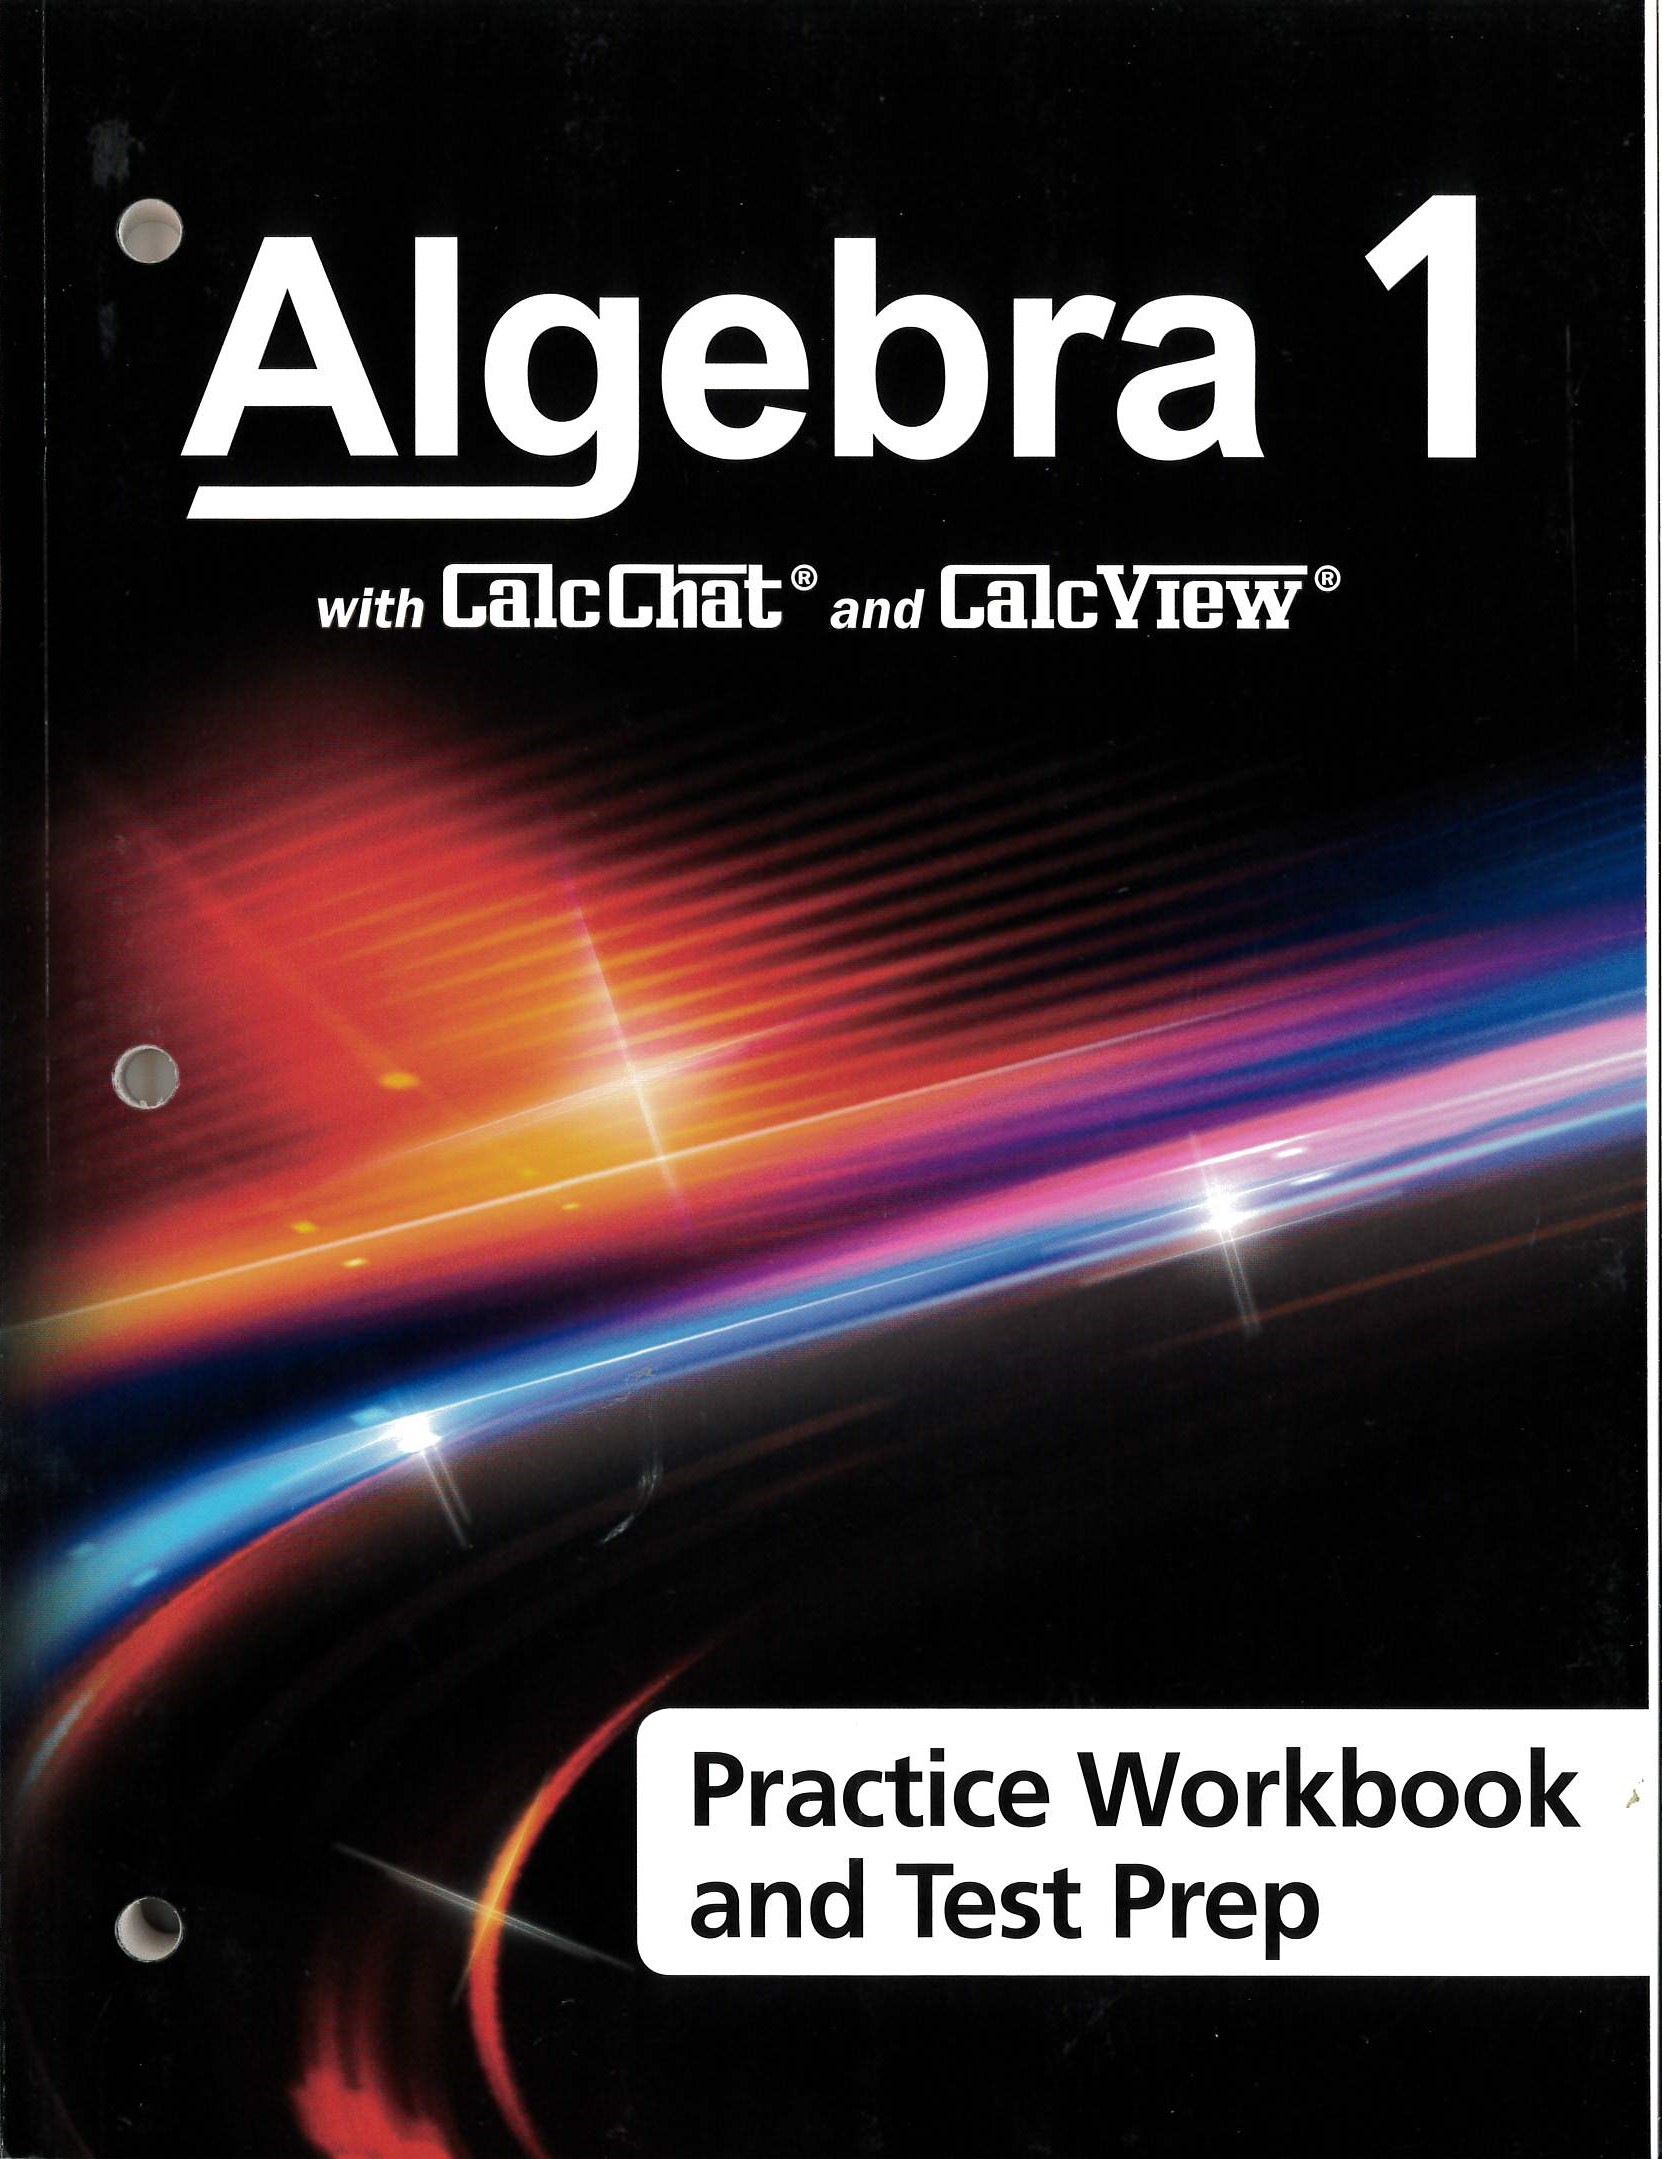 Algebra 1 (Practice workbook and test prep) : with CalcChat and CalcView